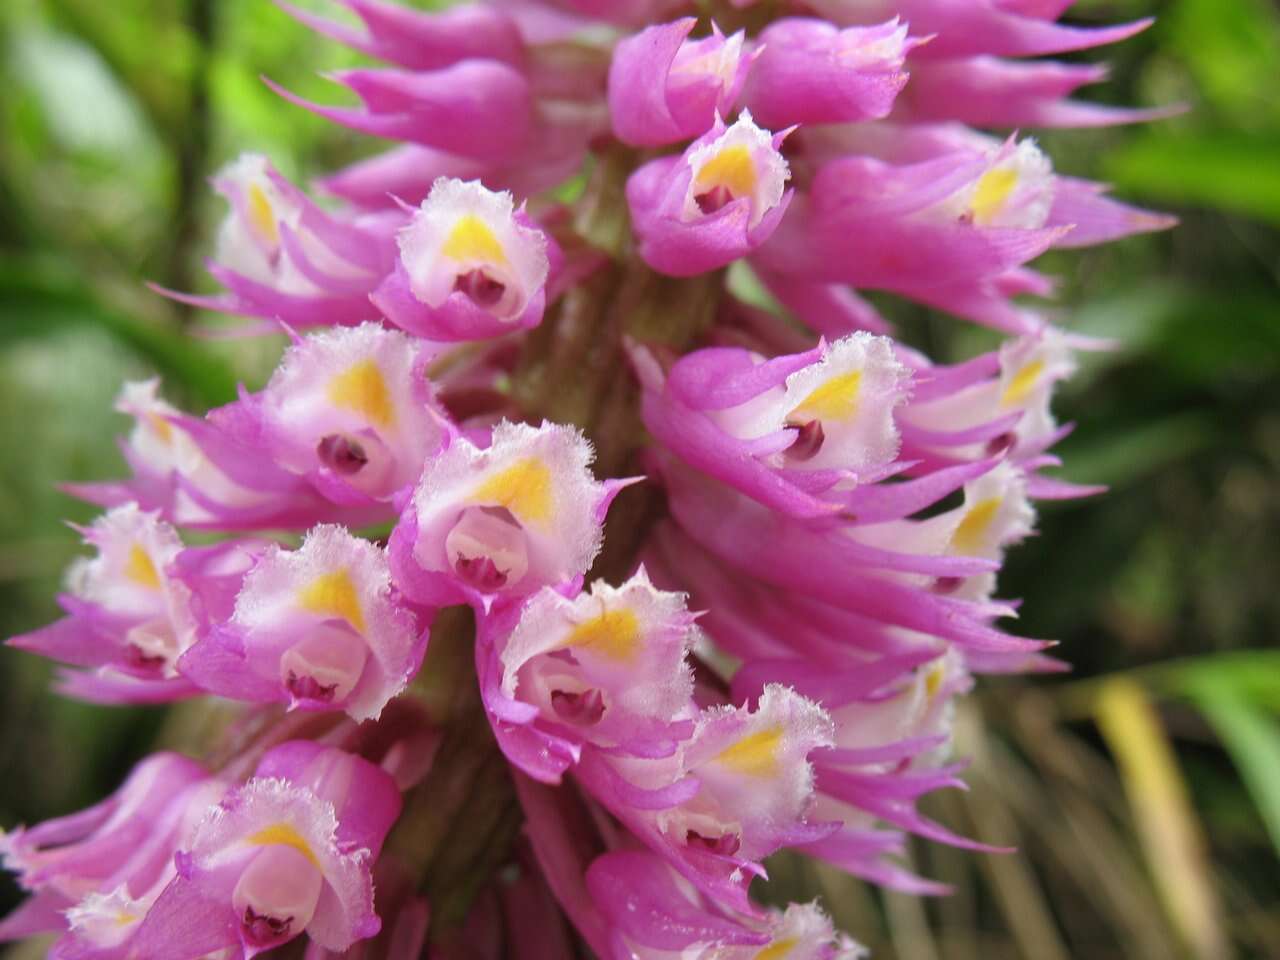 Image of Tiger orchid